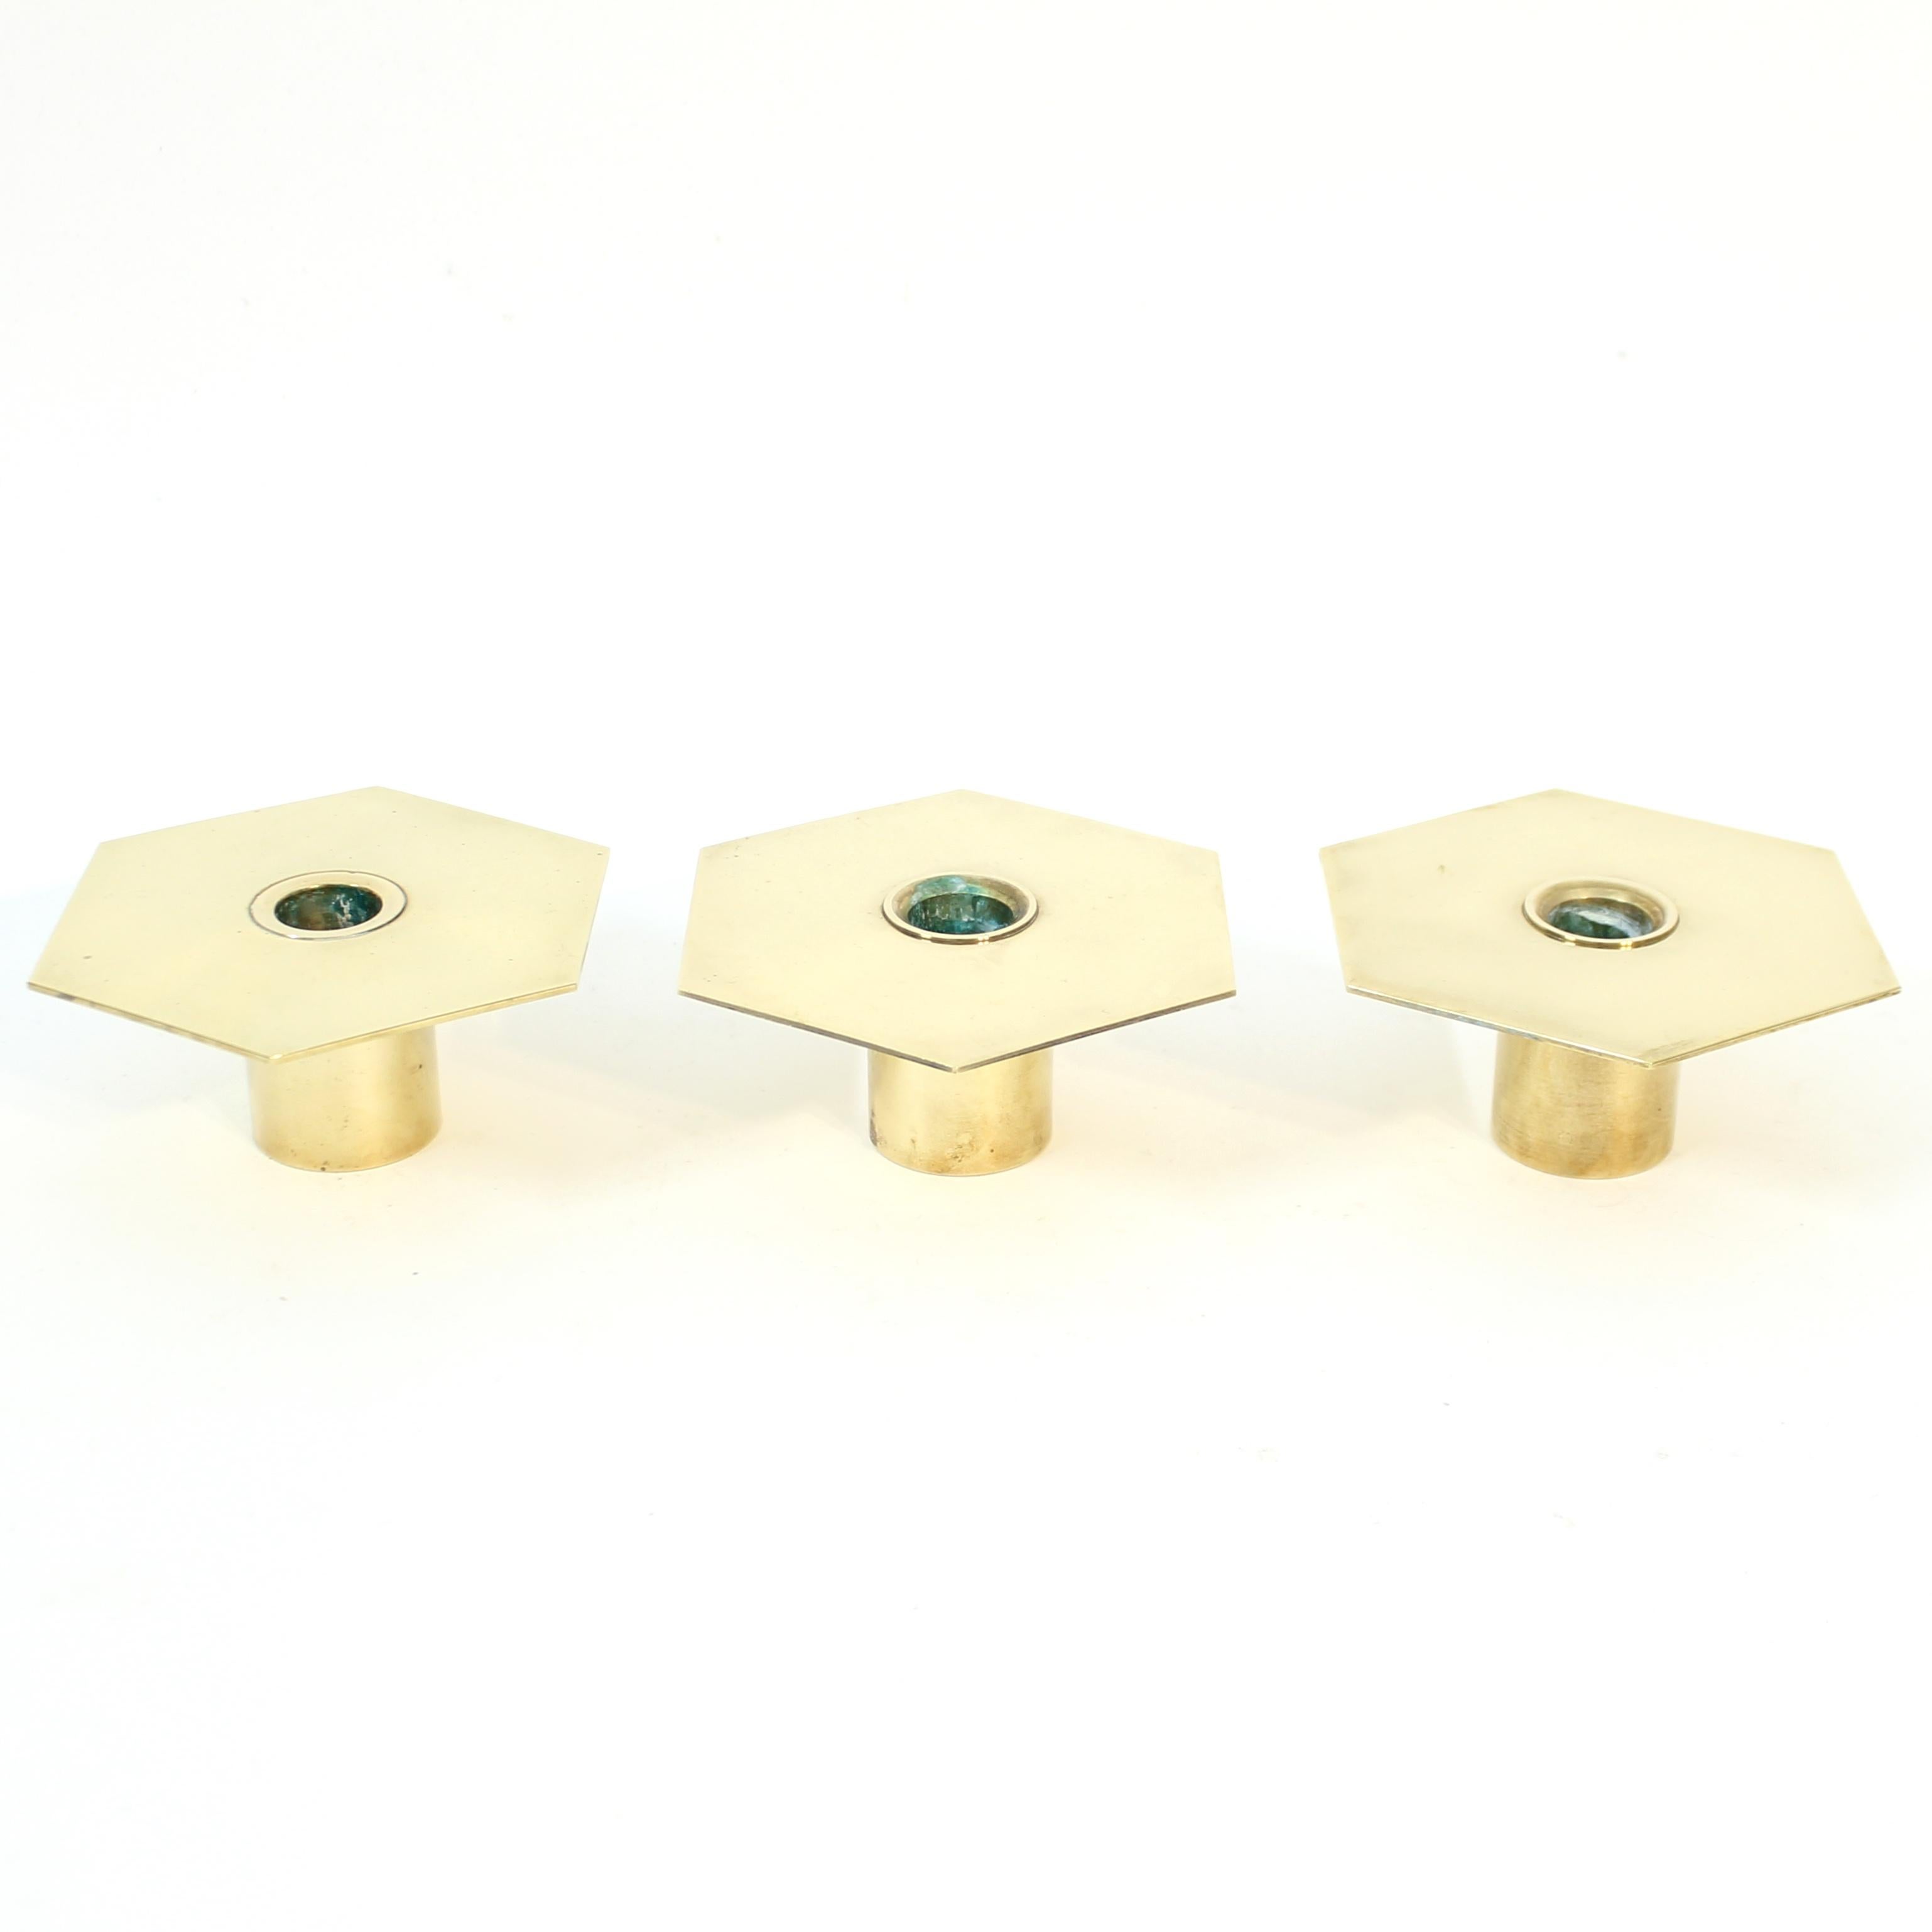 Set of three Romb candle holders designed by Sigurd Persson for his own company. This design was created by Sigurd in 1985 but has a clear mid-century modernist vibe that was very popular in the 1960s even though they saw the light of day in the